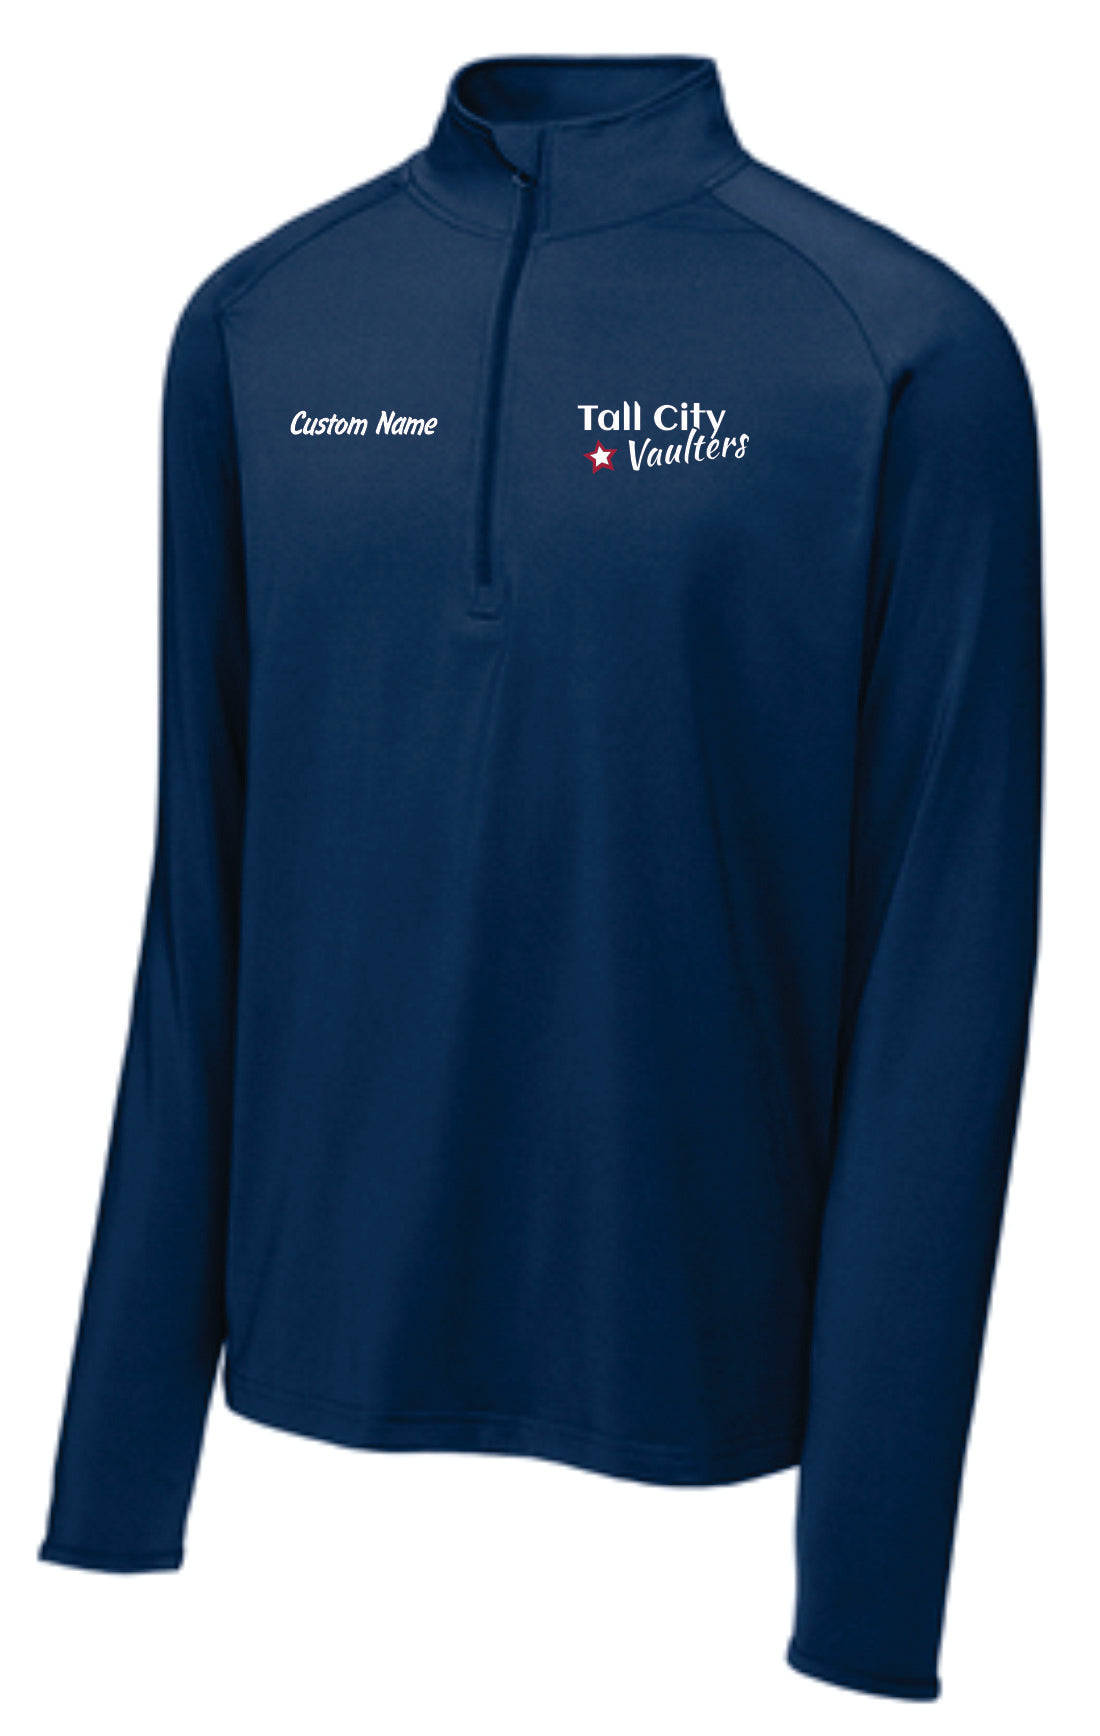 Tall City Vaulters 1/4 Zips, Custom Name INCLUDED